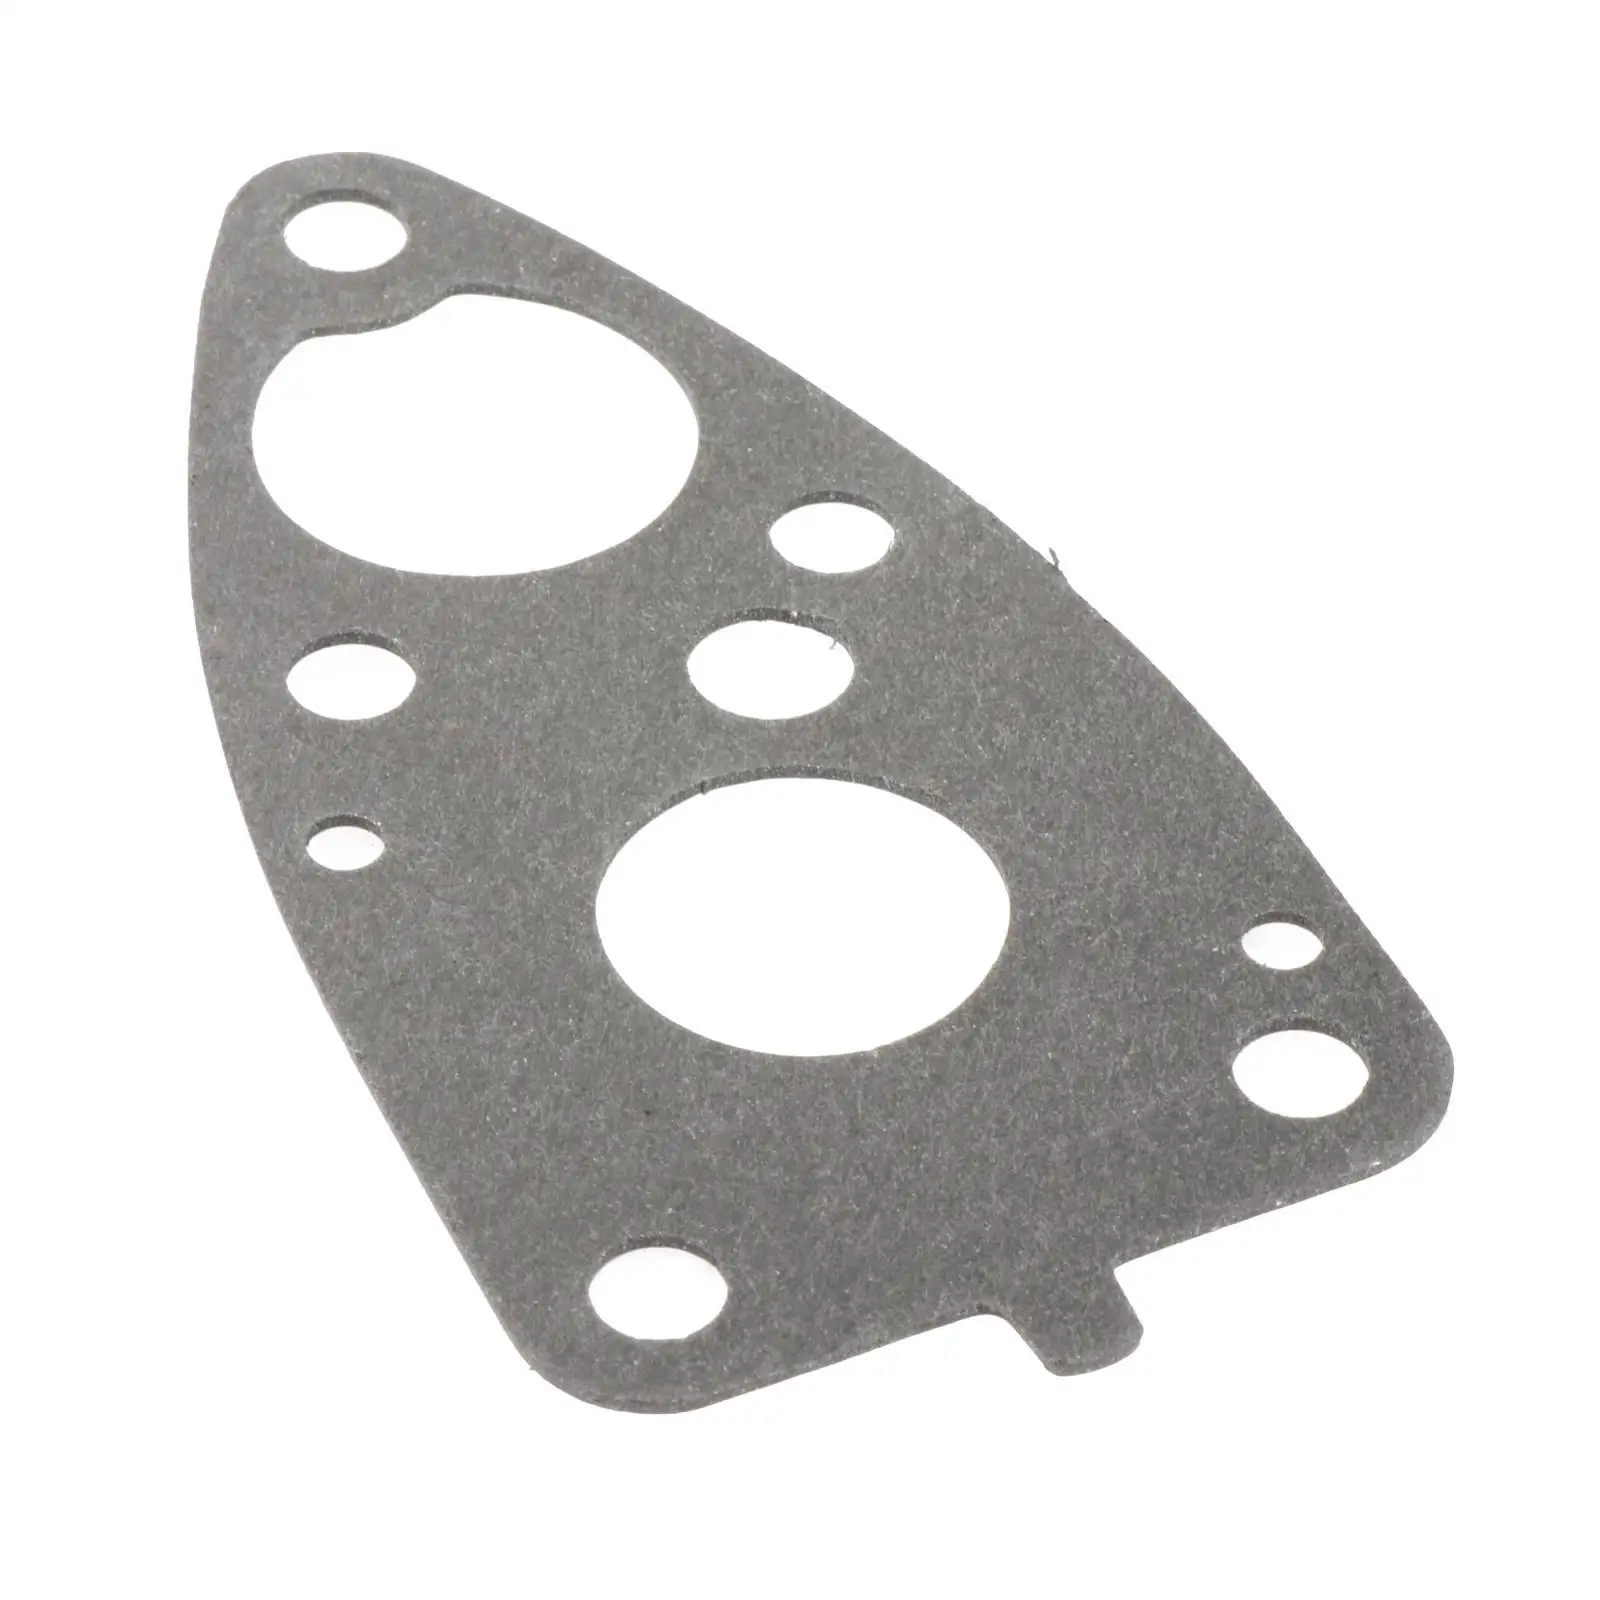 Packing Lower Case, Parts Lower Gear Case Plate Gasket Fit for Yamaha F4A 4A 4B 5C 6E0-45315-A0-00 6E0-45315-A0 Outboard Engine